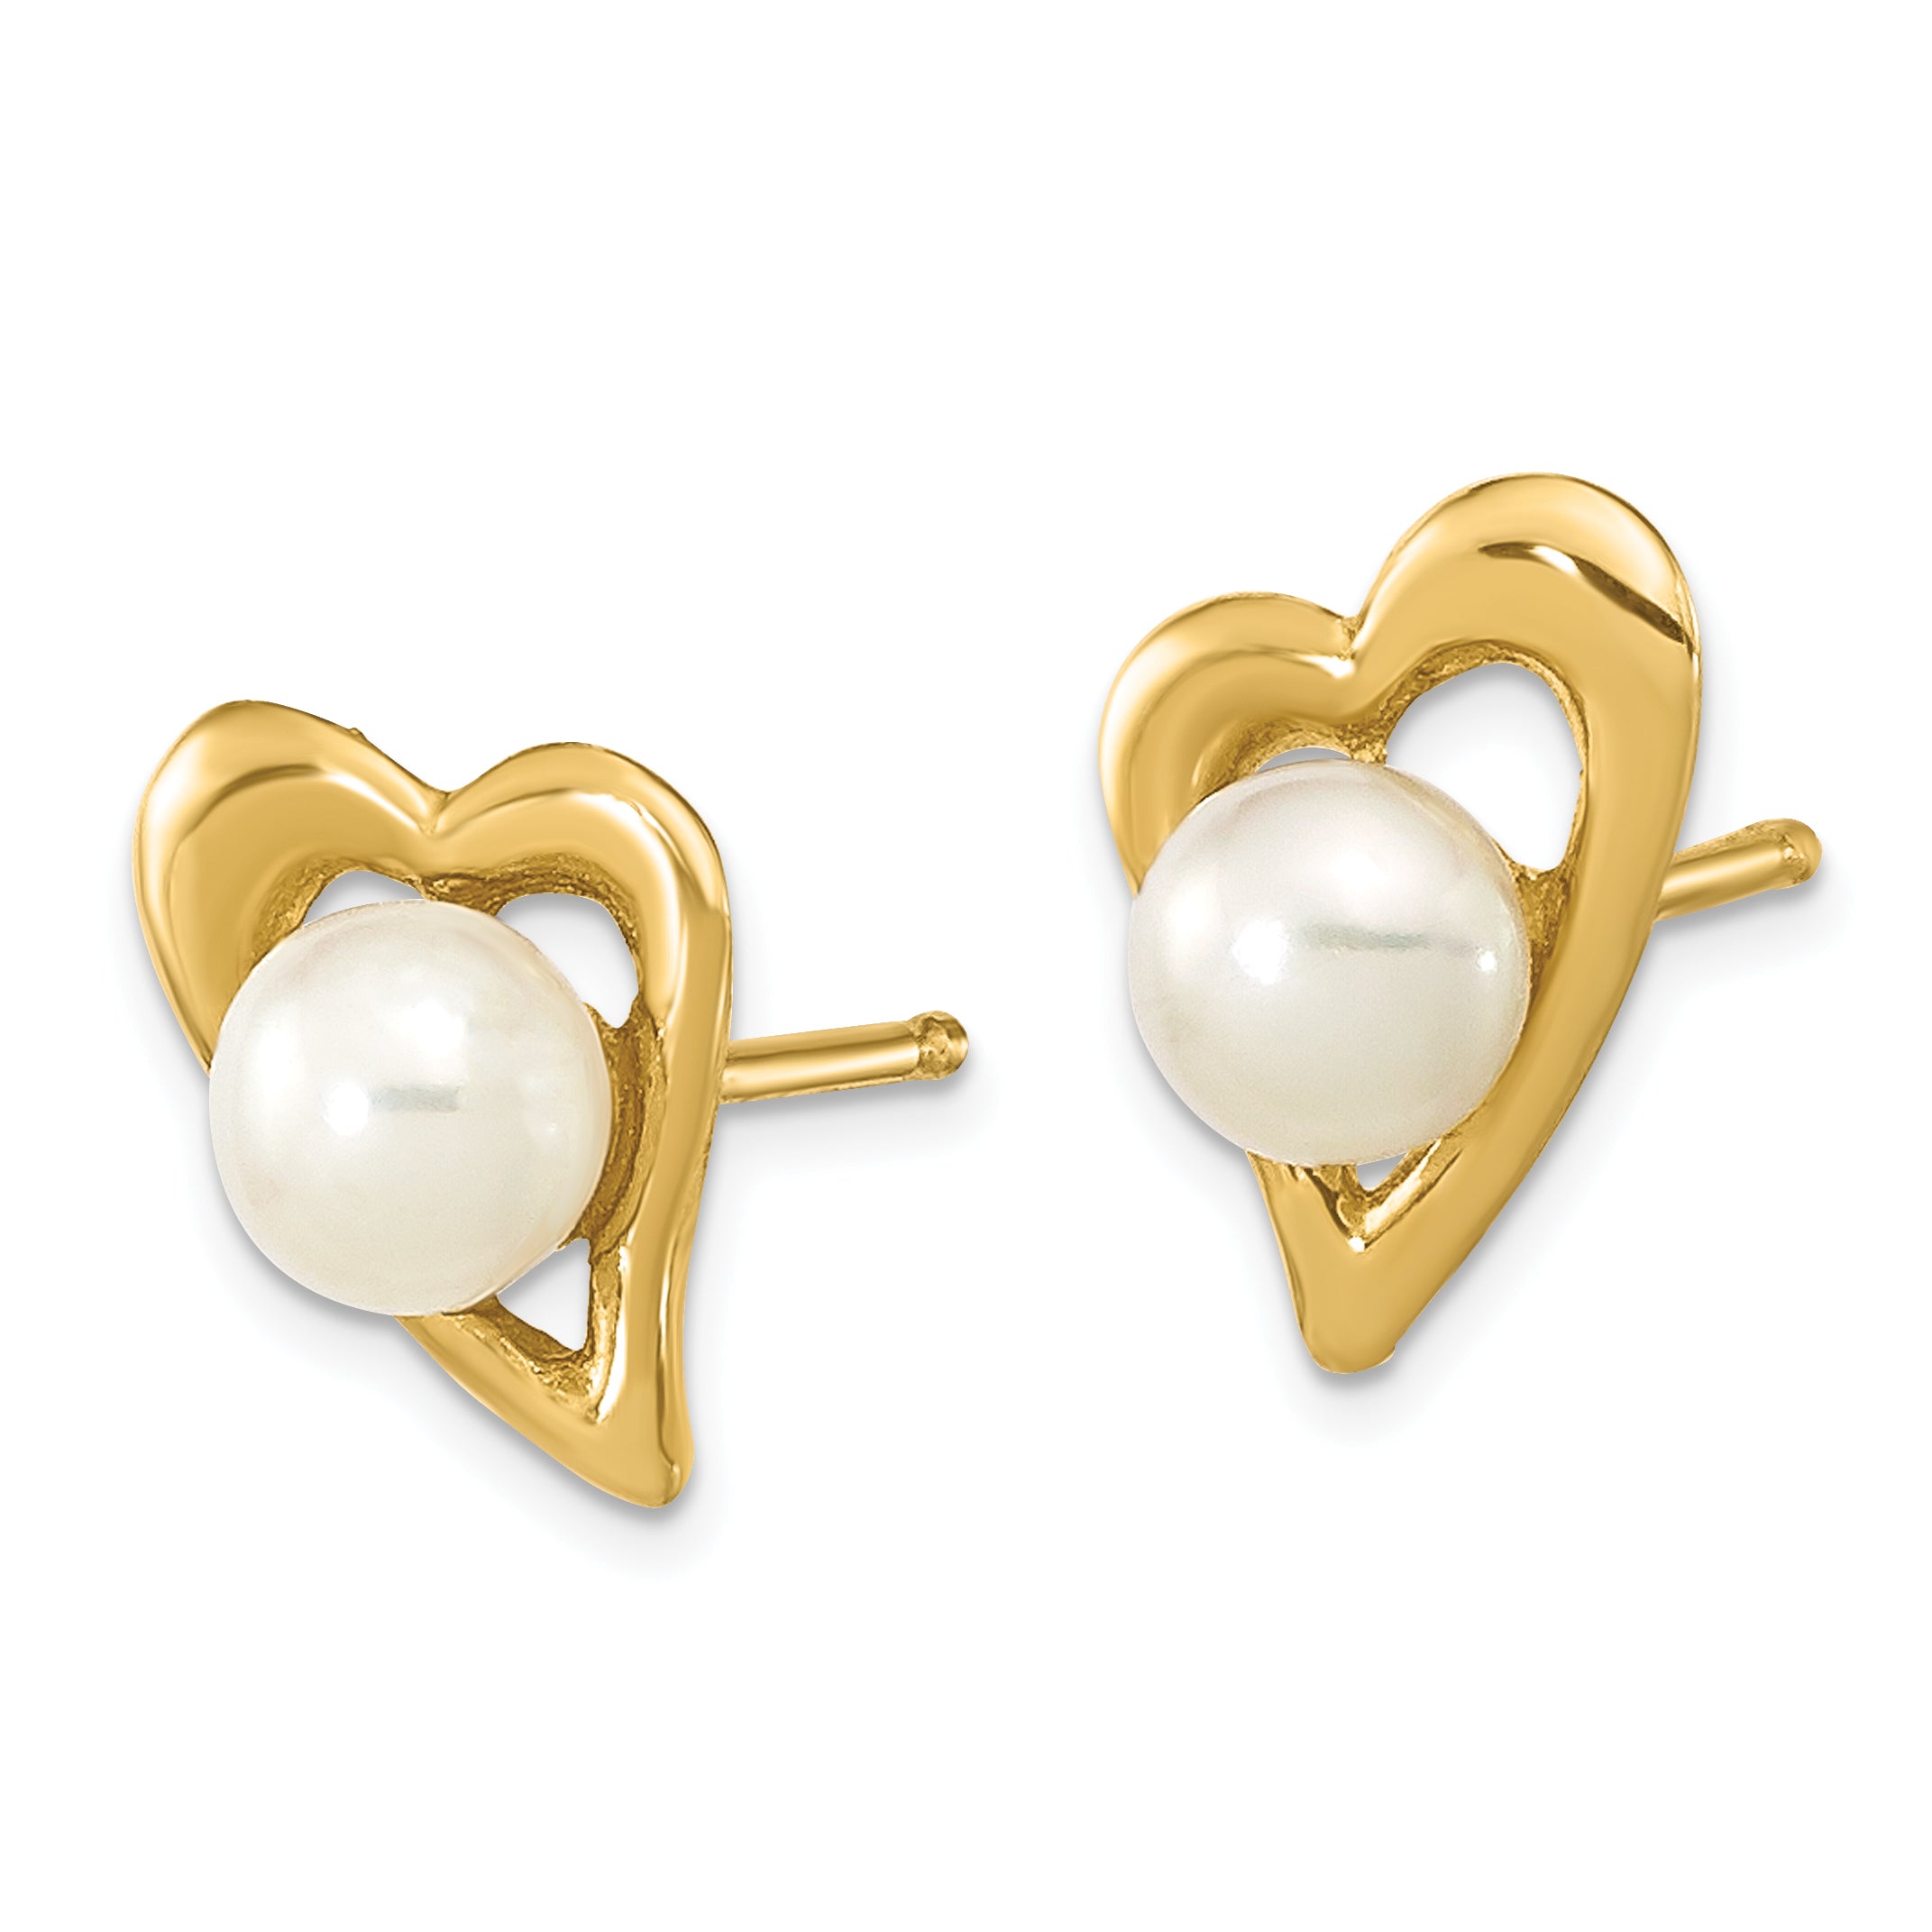 14k 3-4mm White Button Freshwater Cultured Pearl Post Earrings